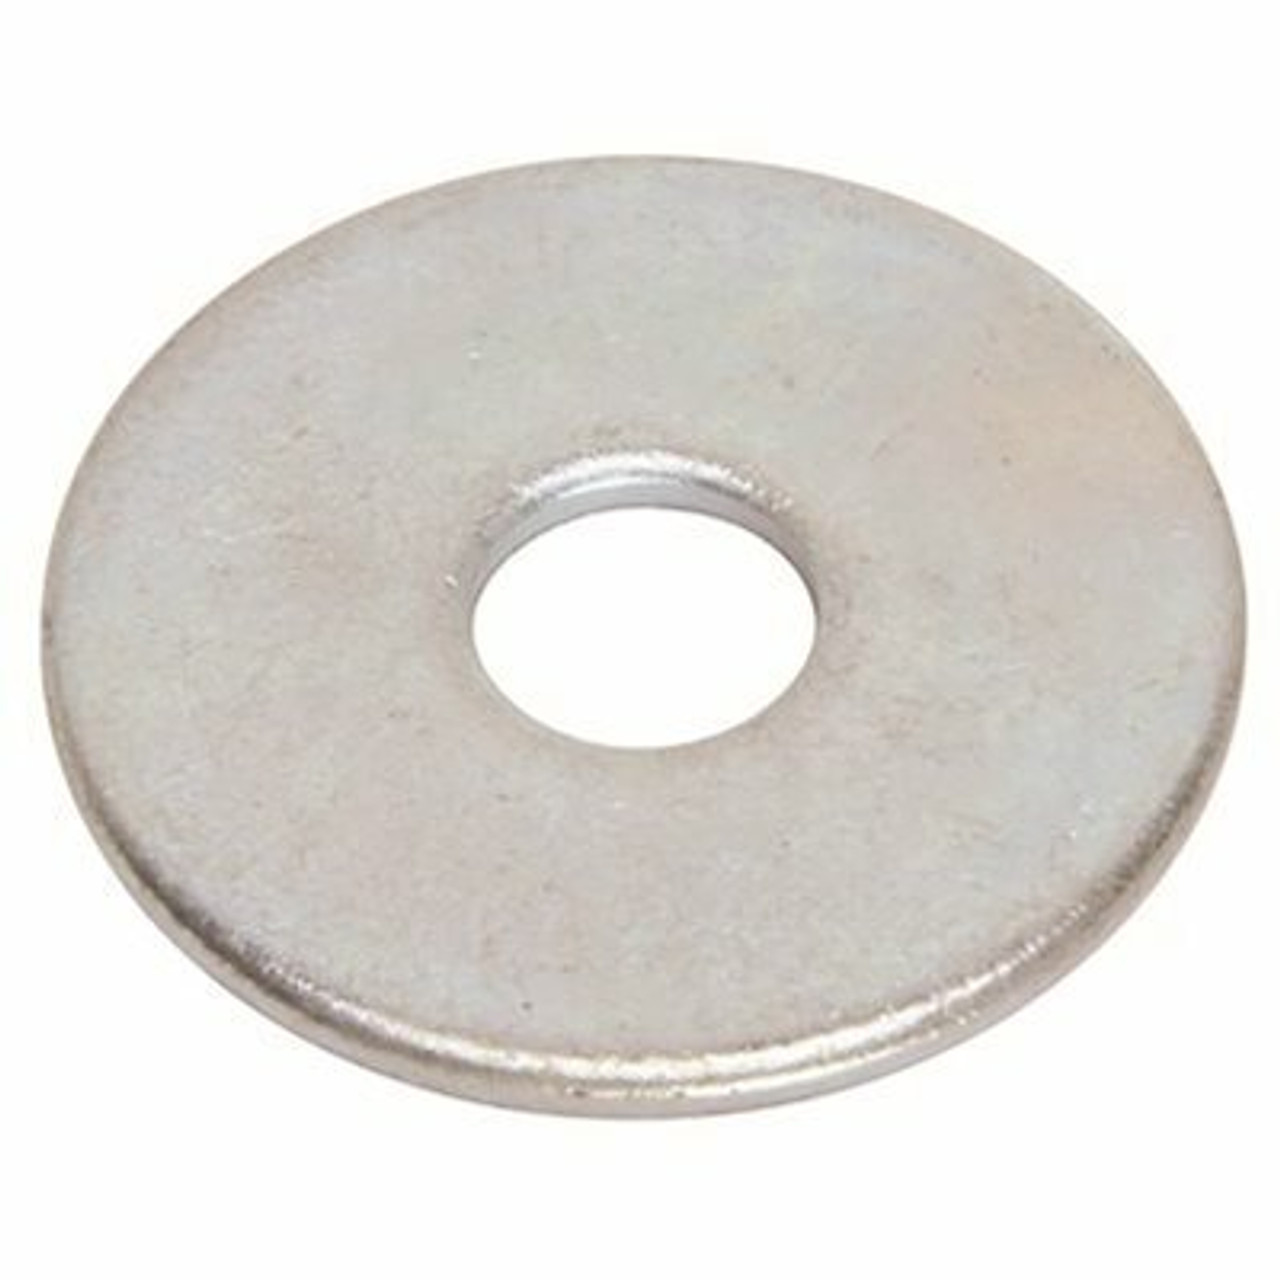 Lindstrom 3/8 In. X 1-1/2 In. Fender Washers (100 Per Pack)